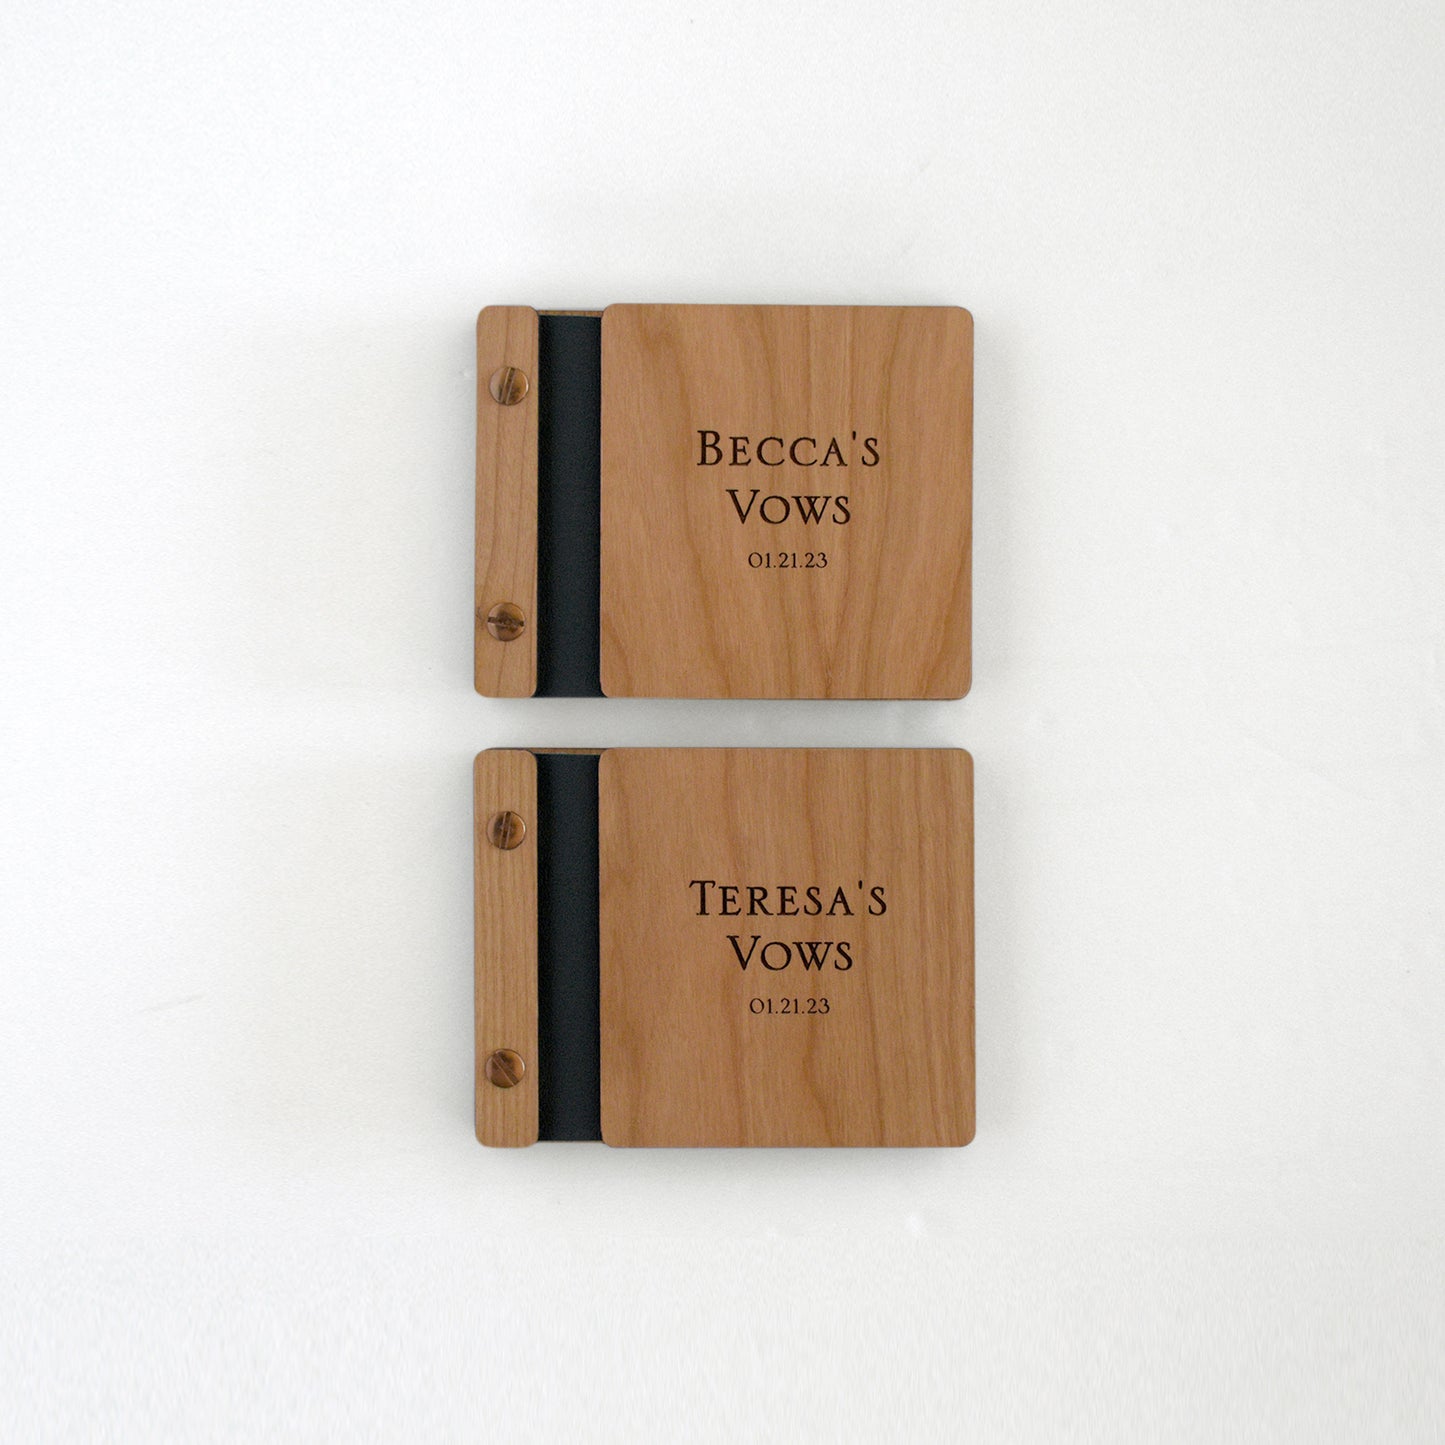 Two vow books sit on a table next to one another. Made of maple wood, aqua binding, and silver hardware, they read Becca's Vows and Teresa's Vows.